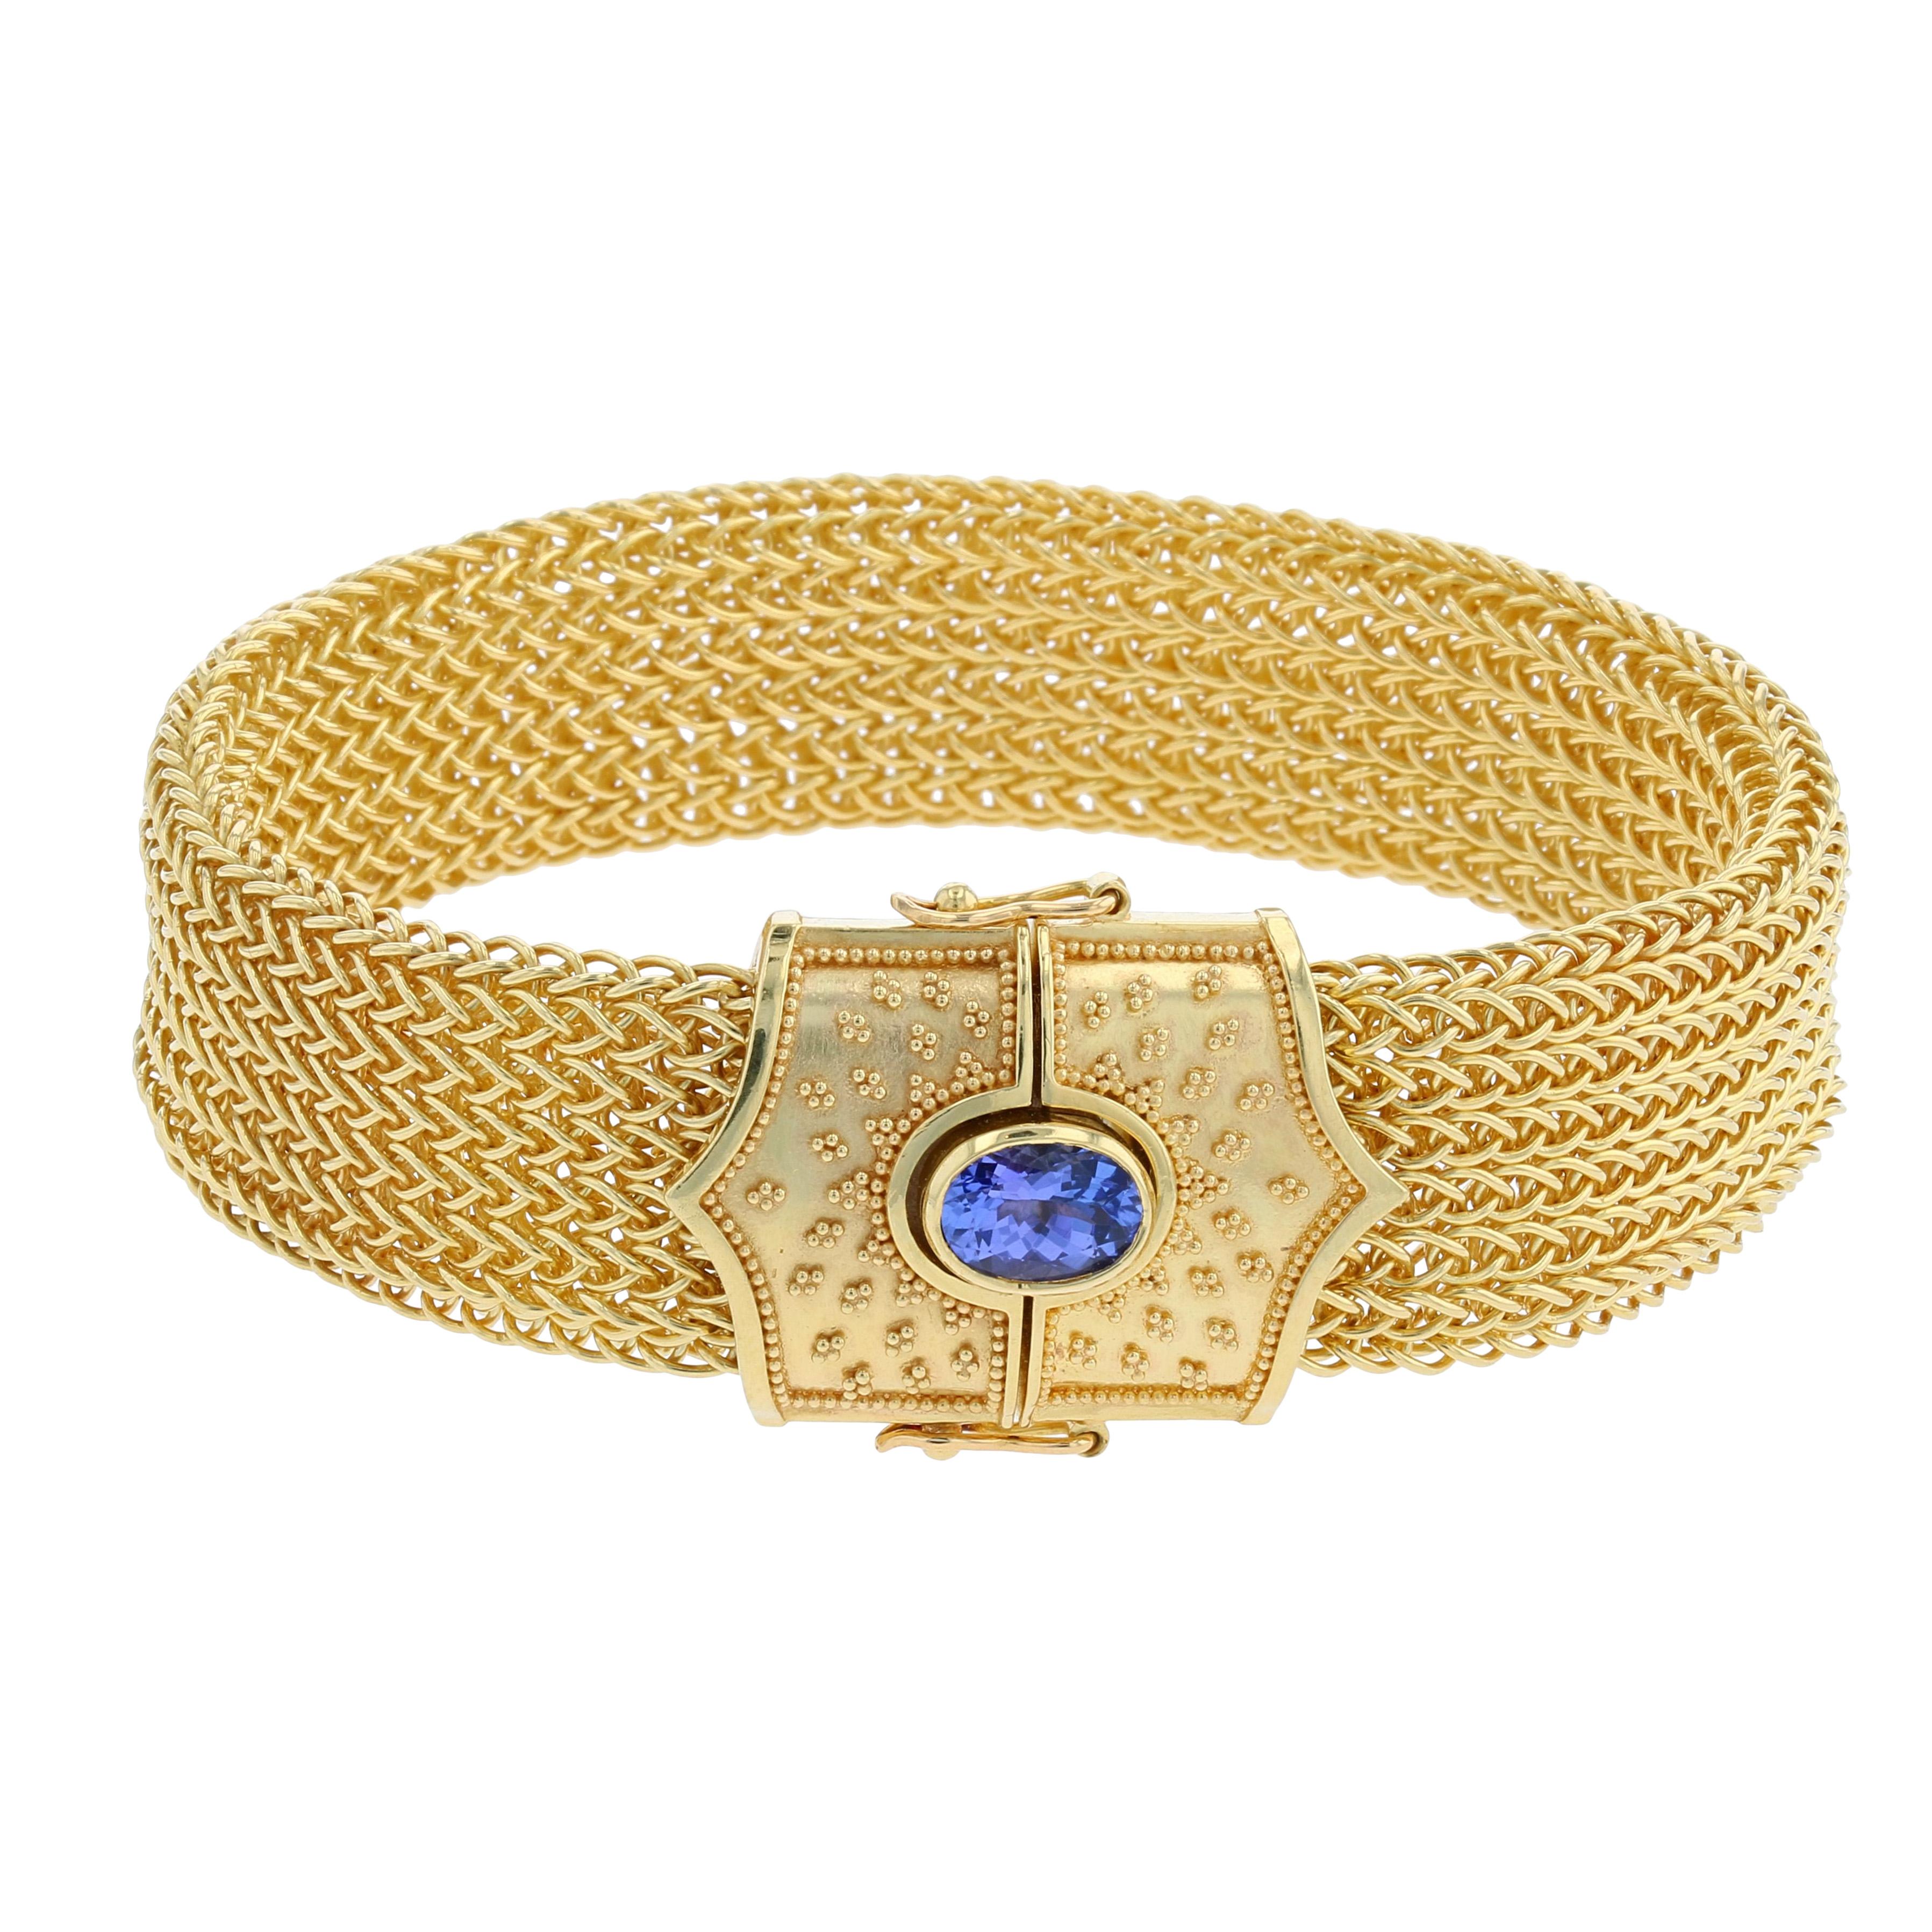 From his limited edition 'Studio Collection', Kent Raible's elegant and supple hand woven chain bracelet presents a beautifully granulated shield, with the clasp hidden within! This bracelet is a great width, stacks well with other bracelets and is